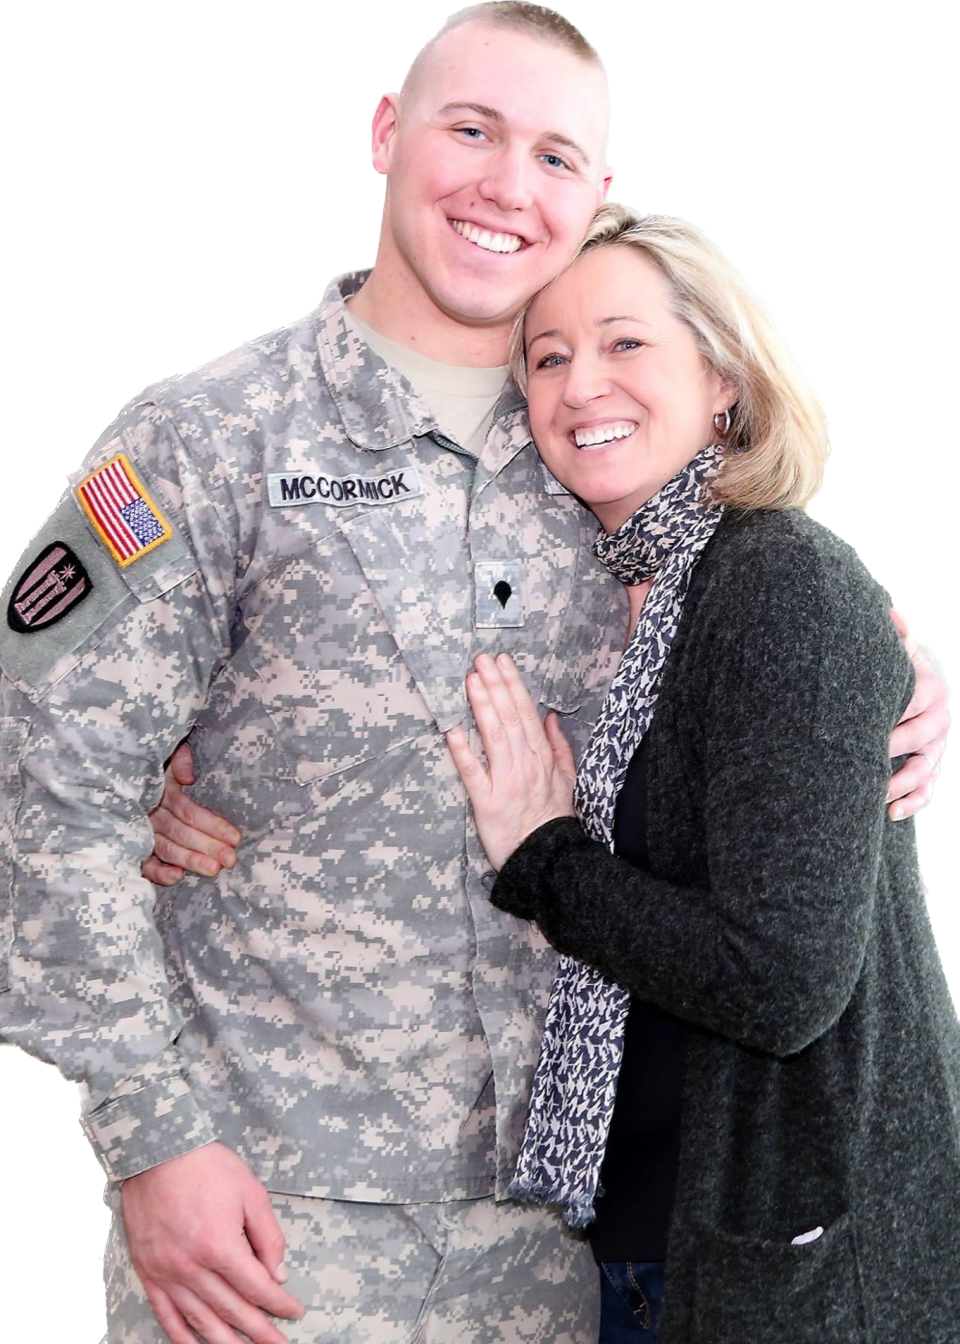 Jake and Kim pictured in 2015. He grew apart from his moms during his time in the military, but they grew close again after a retreat in Mexico changed his life.